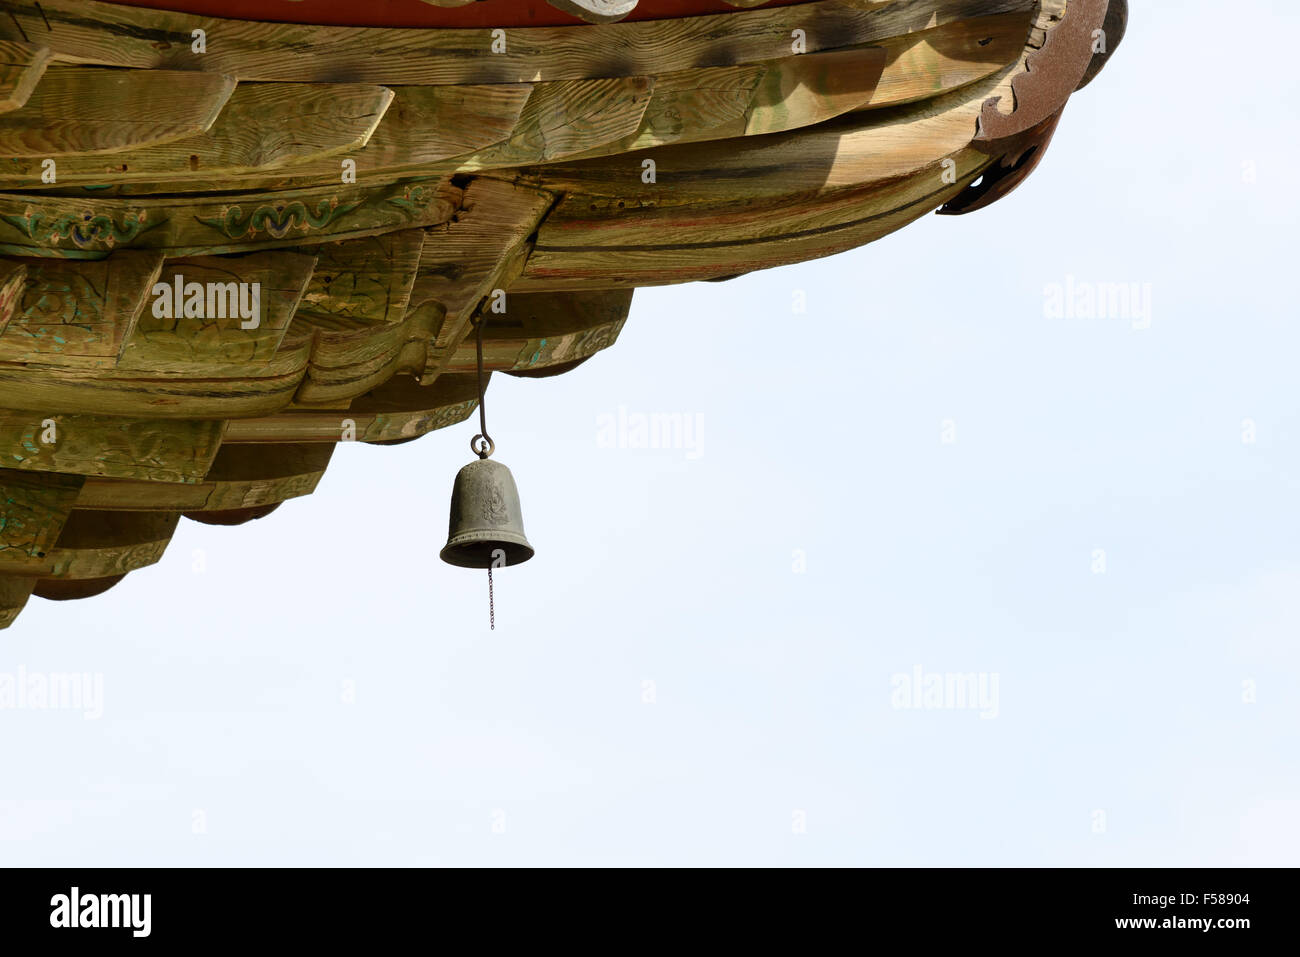 wind chime (called Punggyeong in Korean) under the eaves in a buddhist temple in Korea. Stock Photo